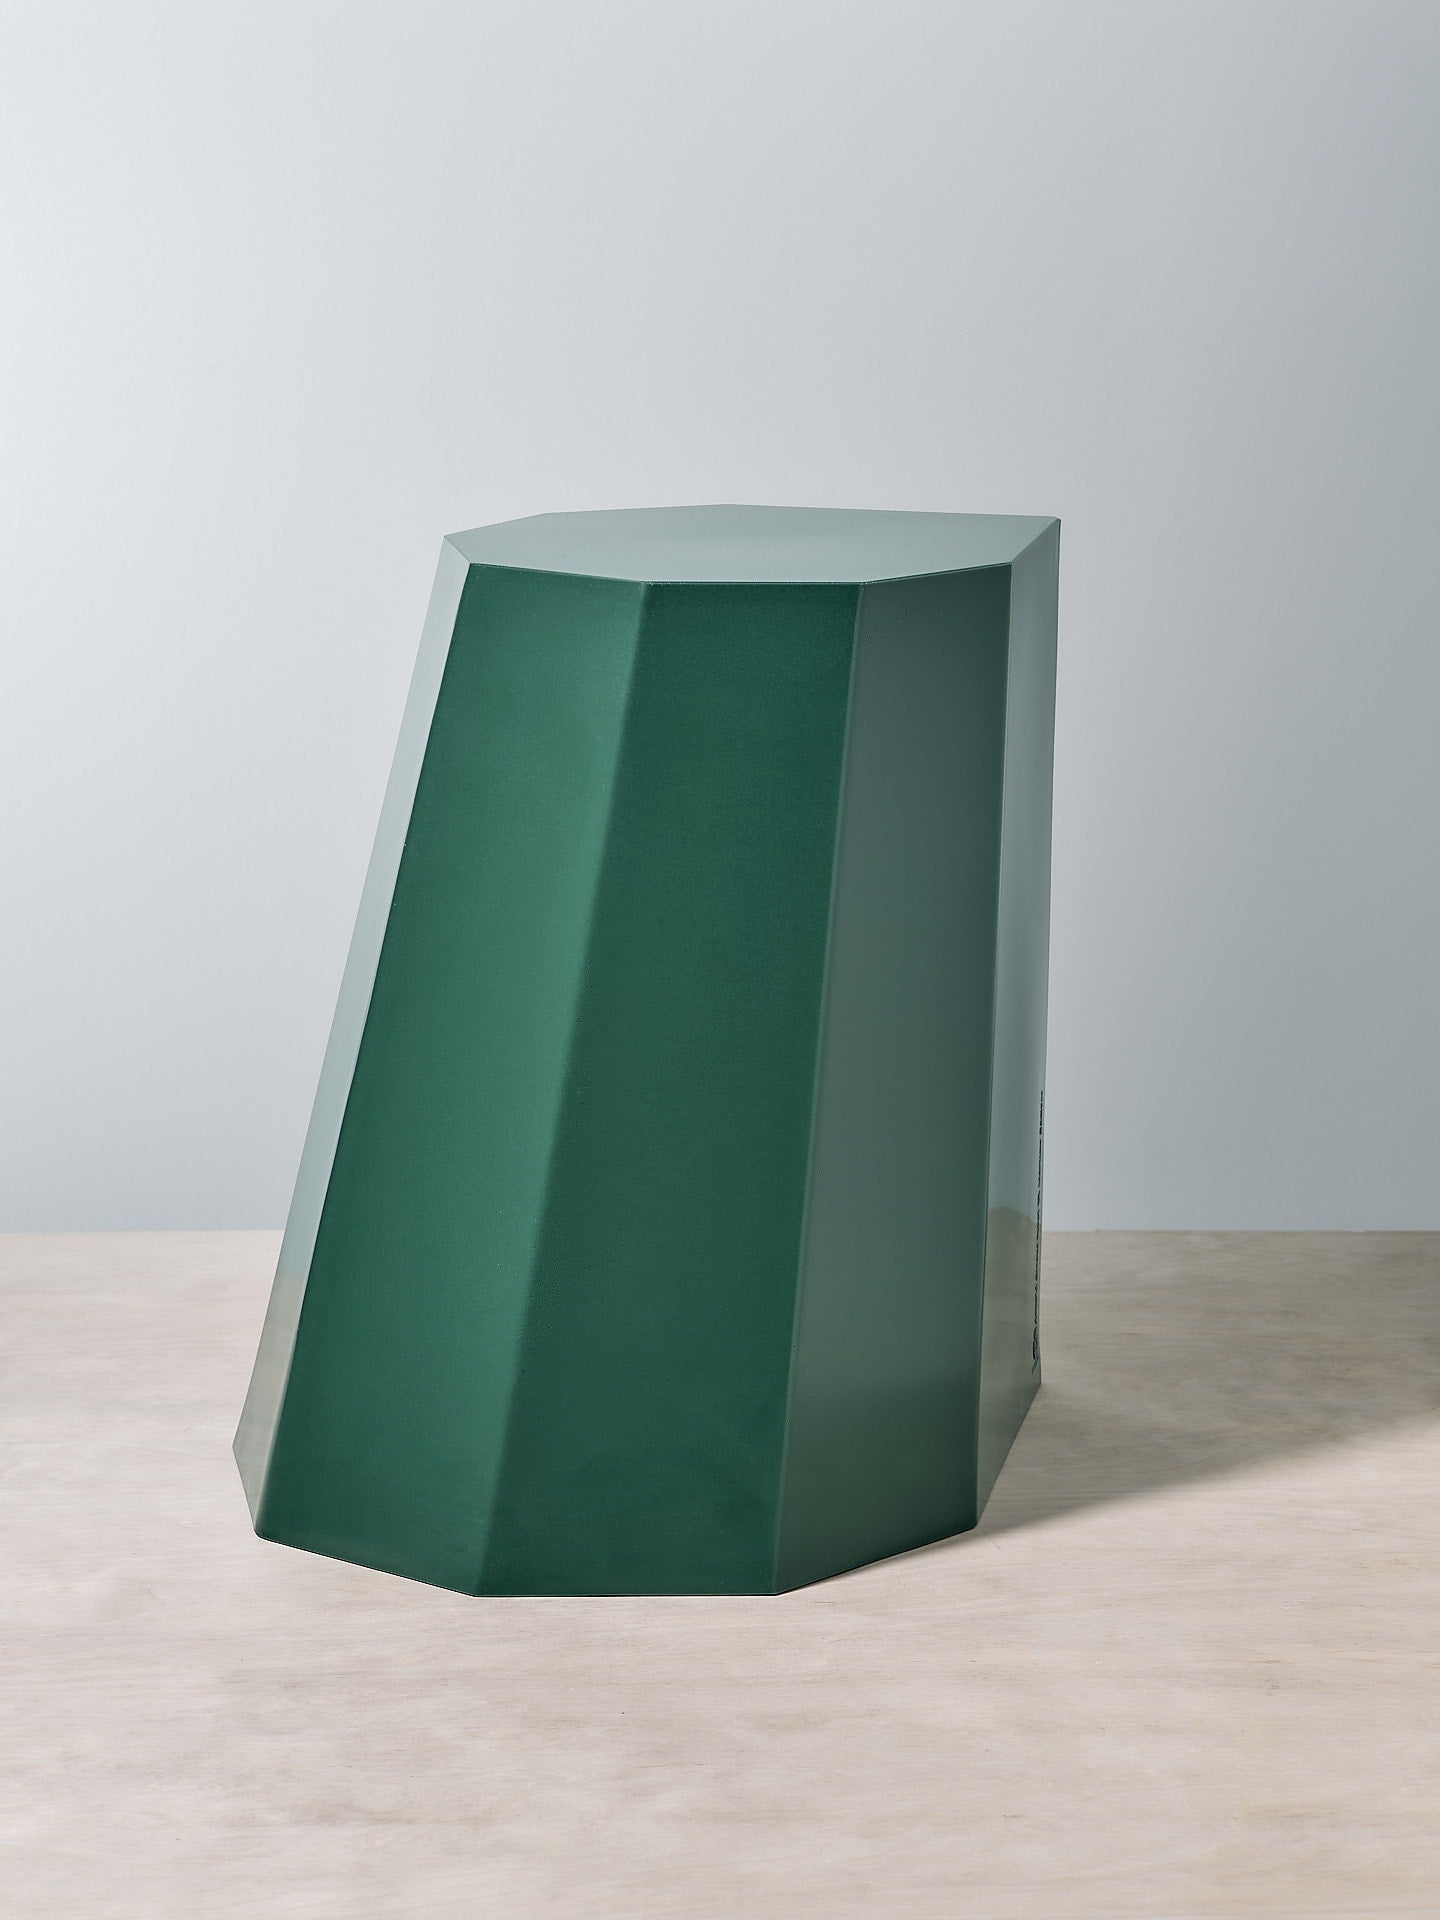 An Arnold Circus Stool - Forest by Martino Gamper on top of a white table.